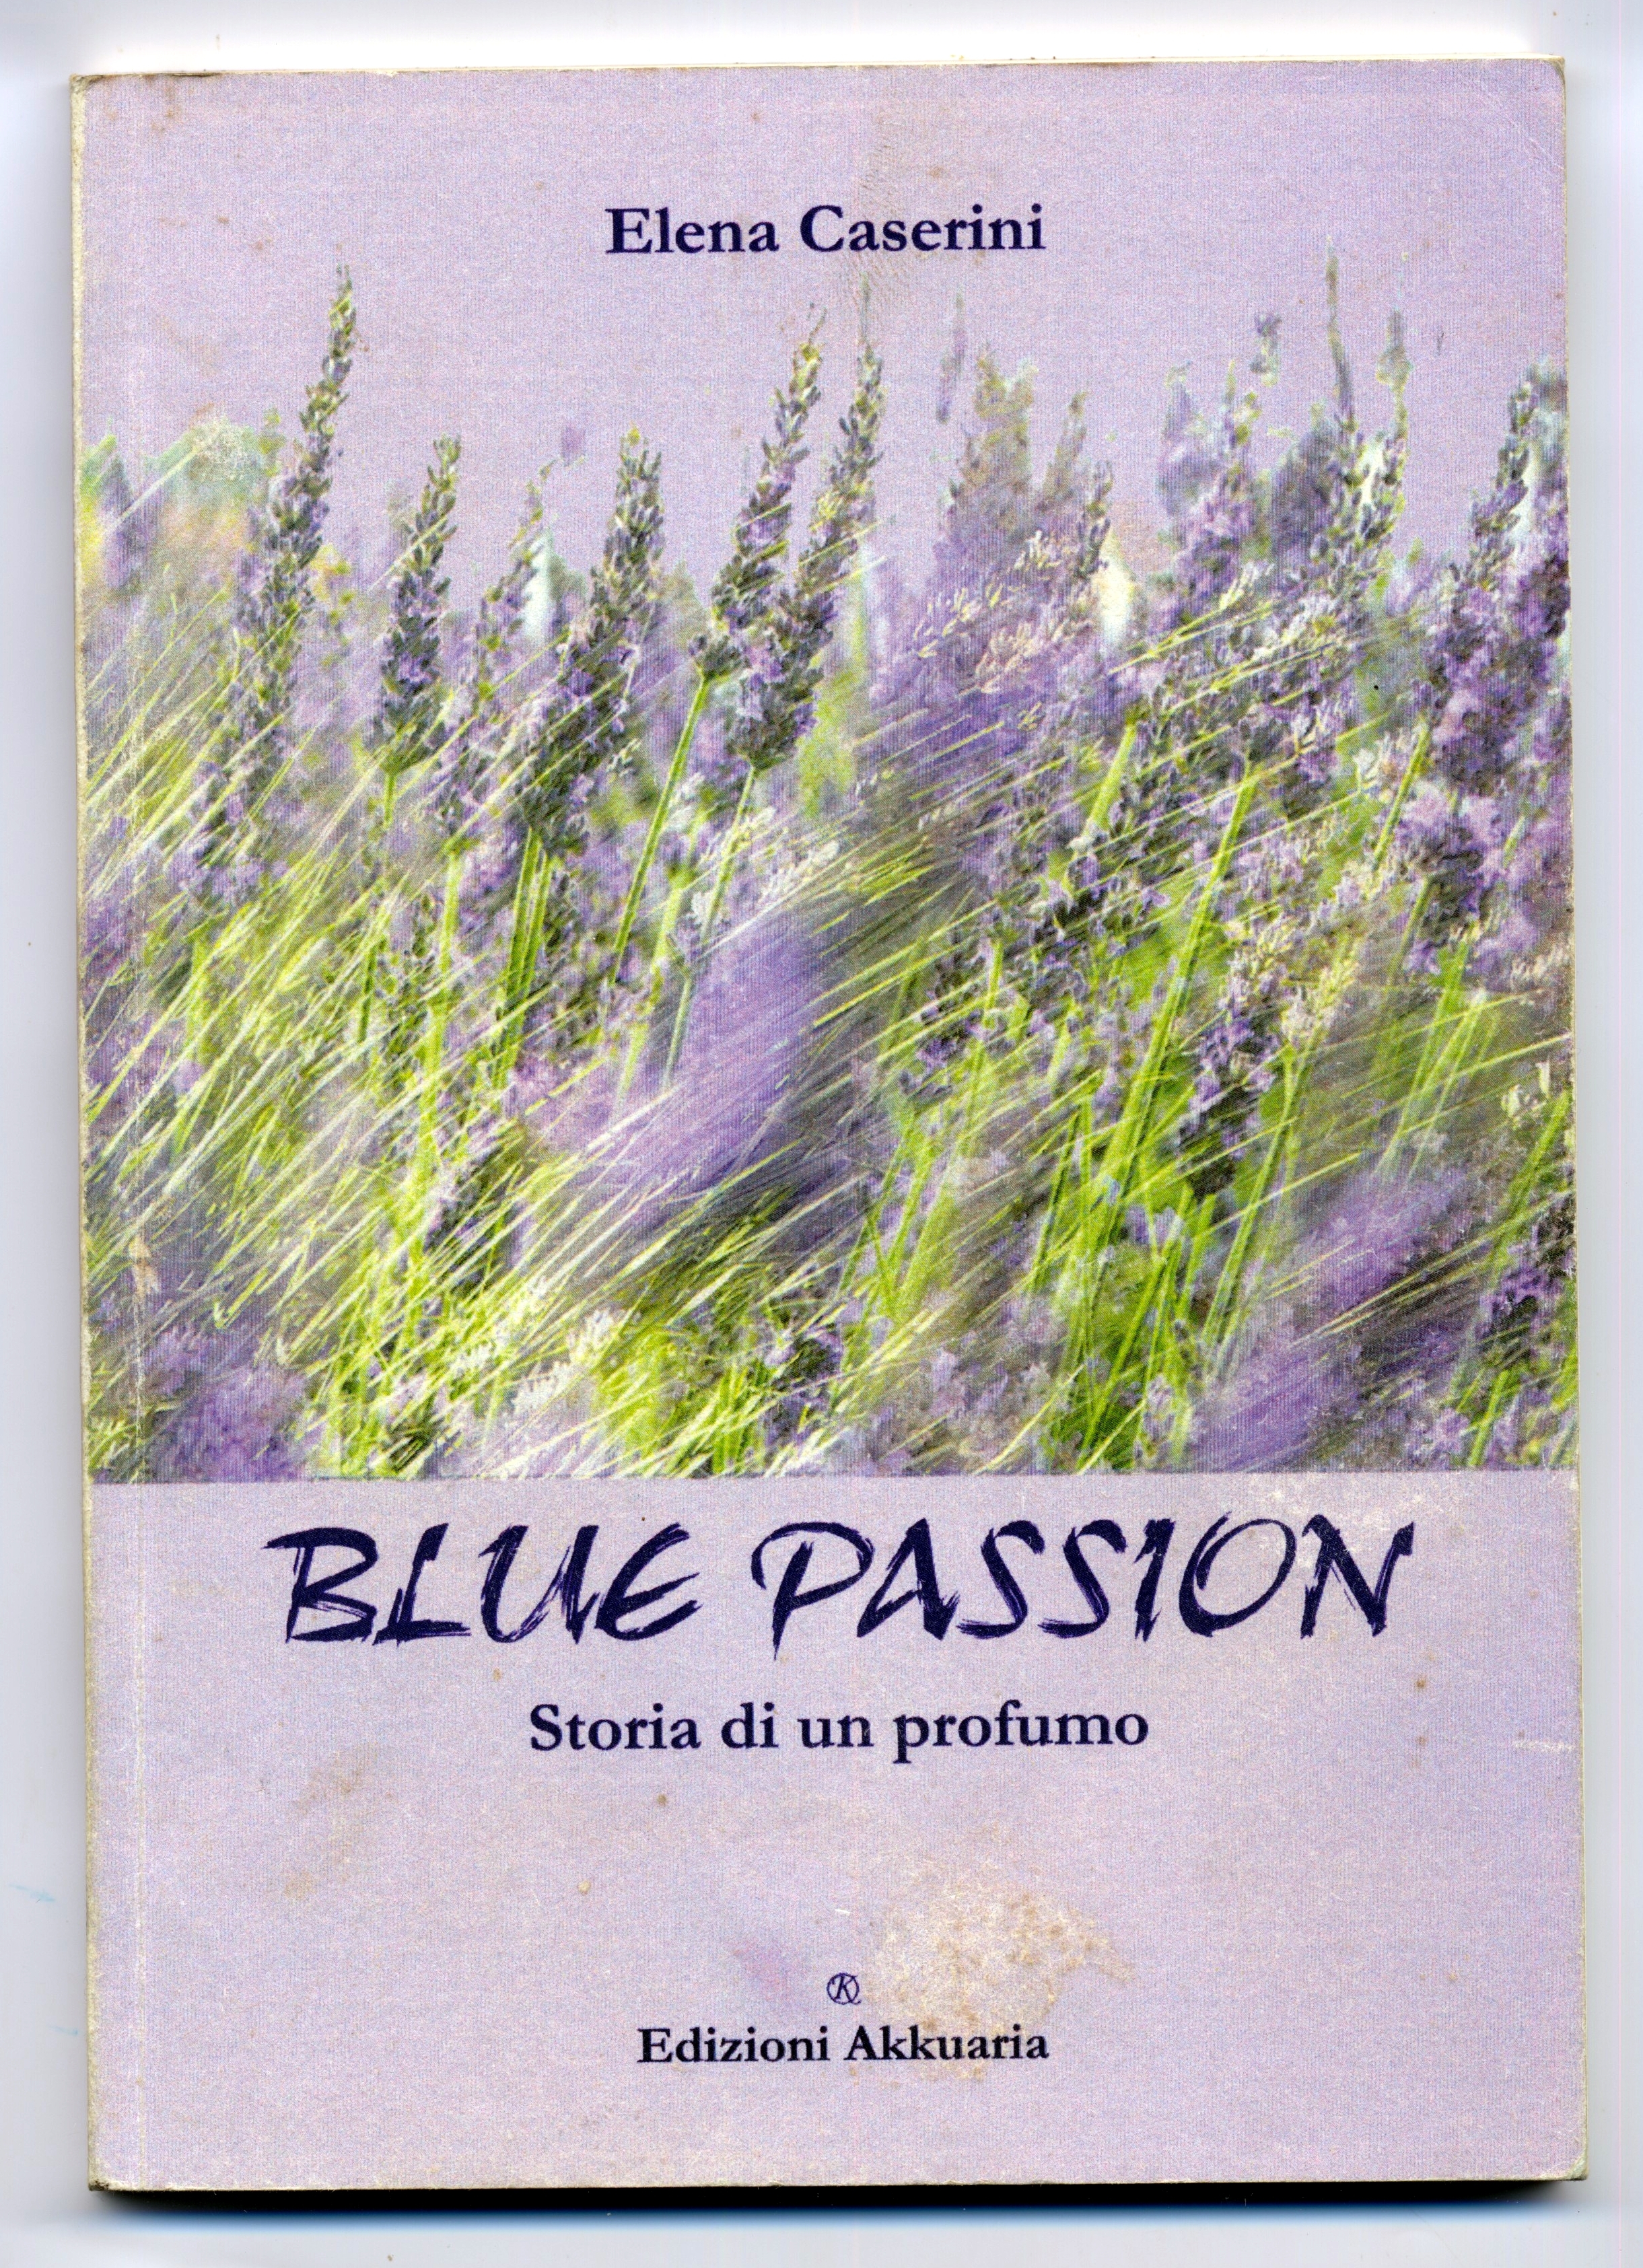 Cover of Elena Caserini's book Blue Passion, the story of a perfume by Akkuaria editions. Story set in Casalvento where the Lavanda del Chianti finds its reality